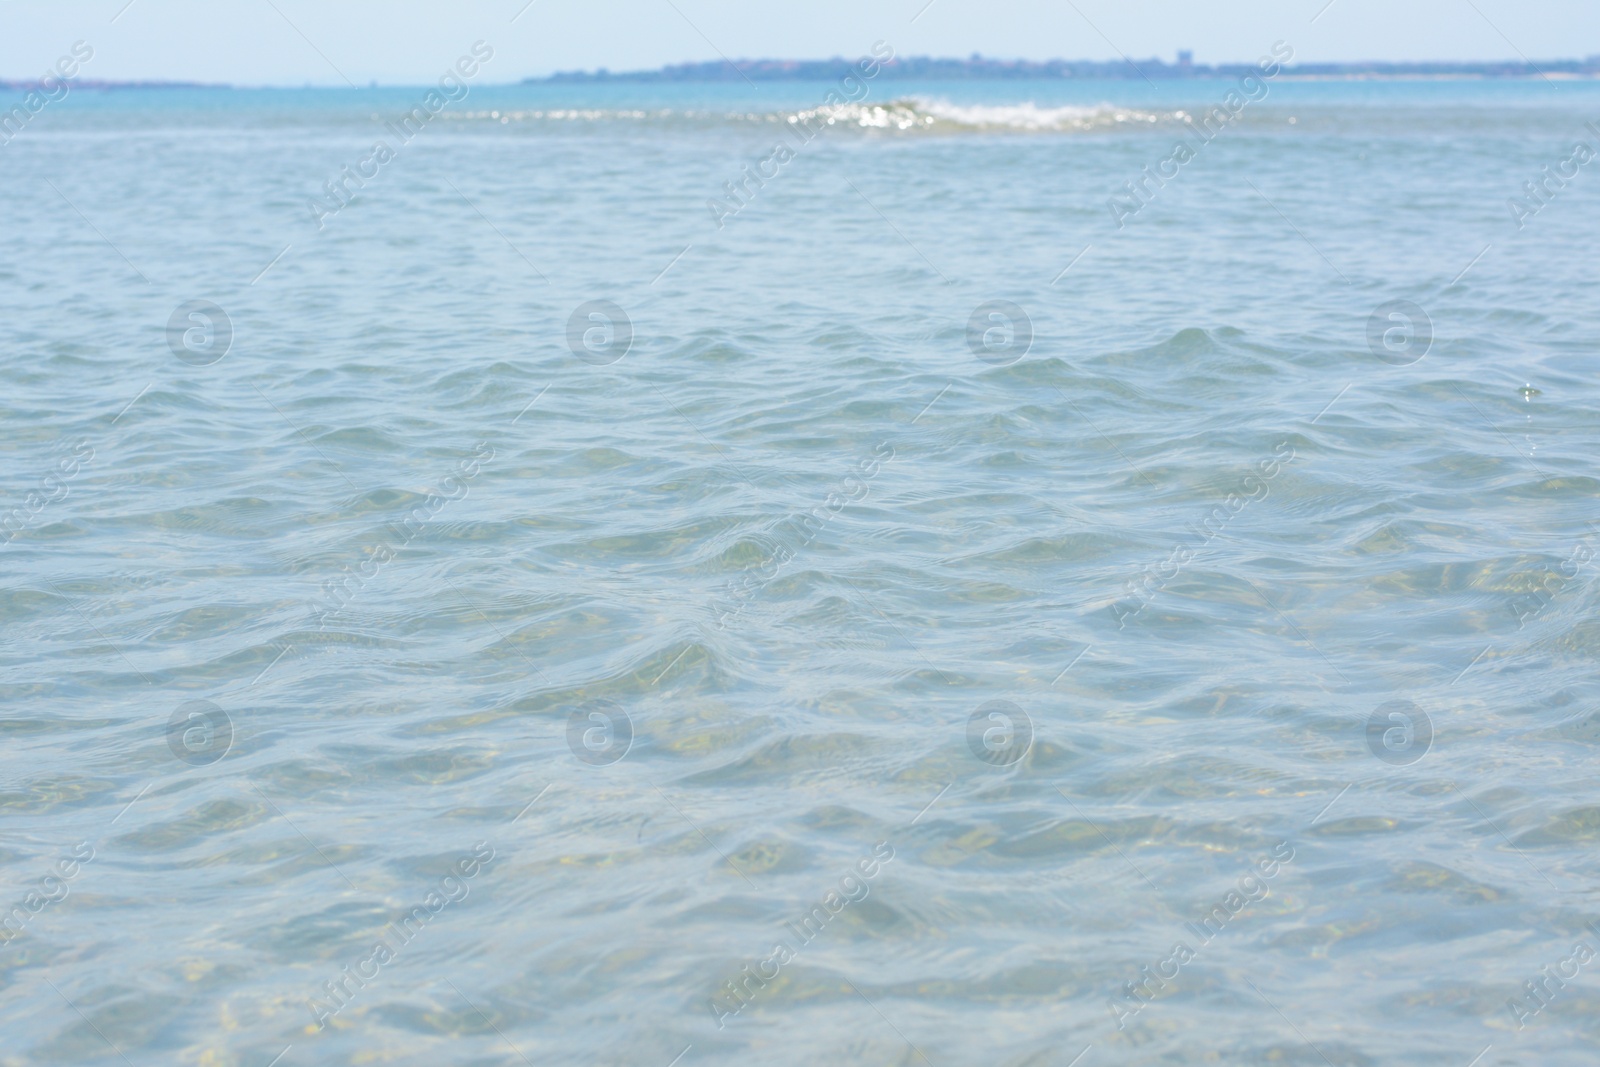 Photo of Picturesque view of calm sea with ripples